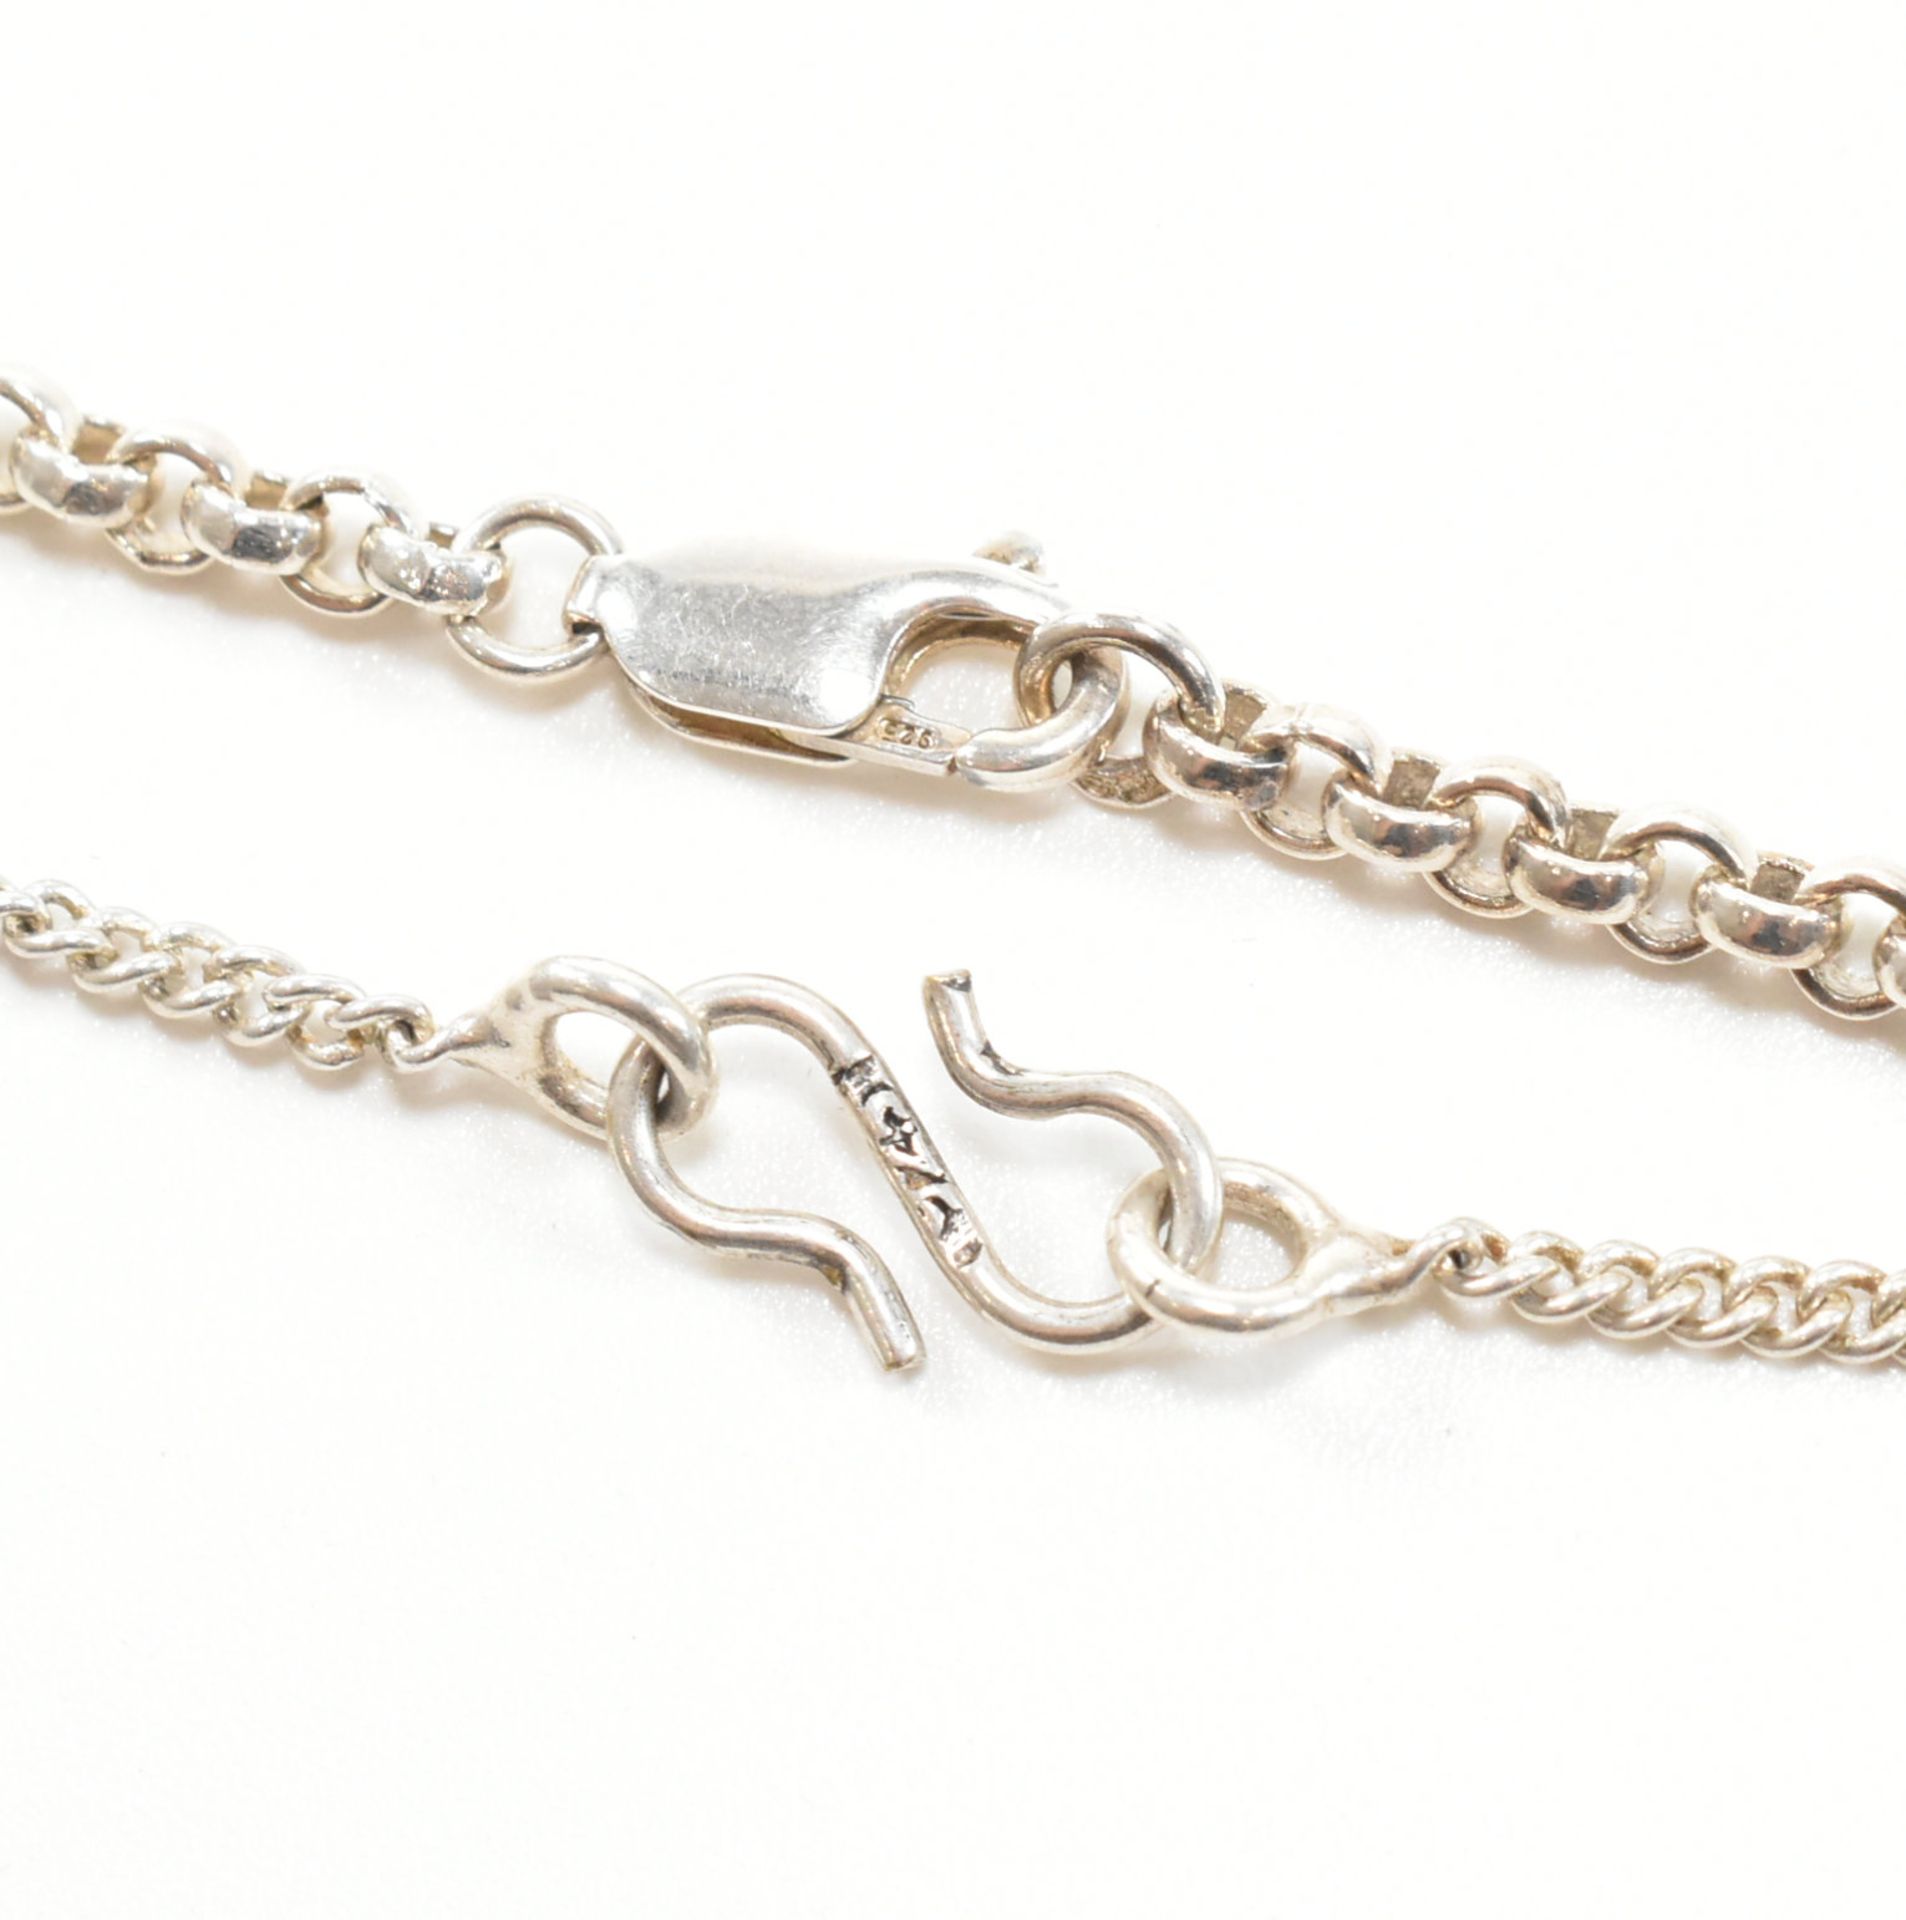 TWO 925 SILVER & BLACK STONE CHAIN NECKLACES - Image 5 of 5